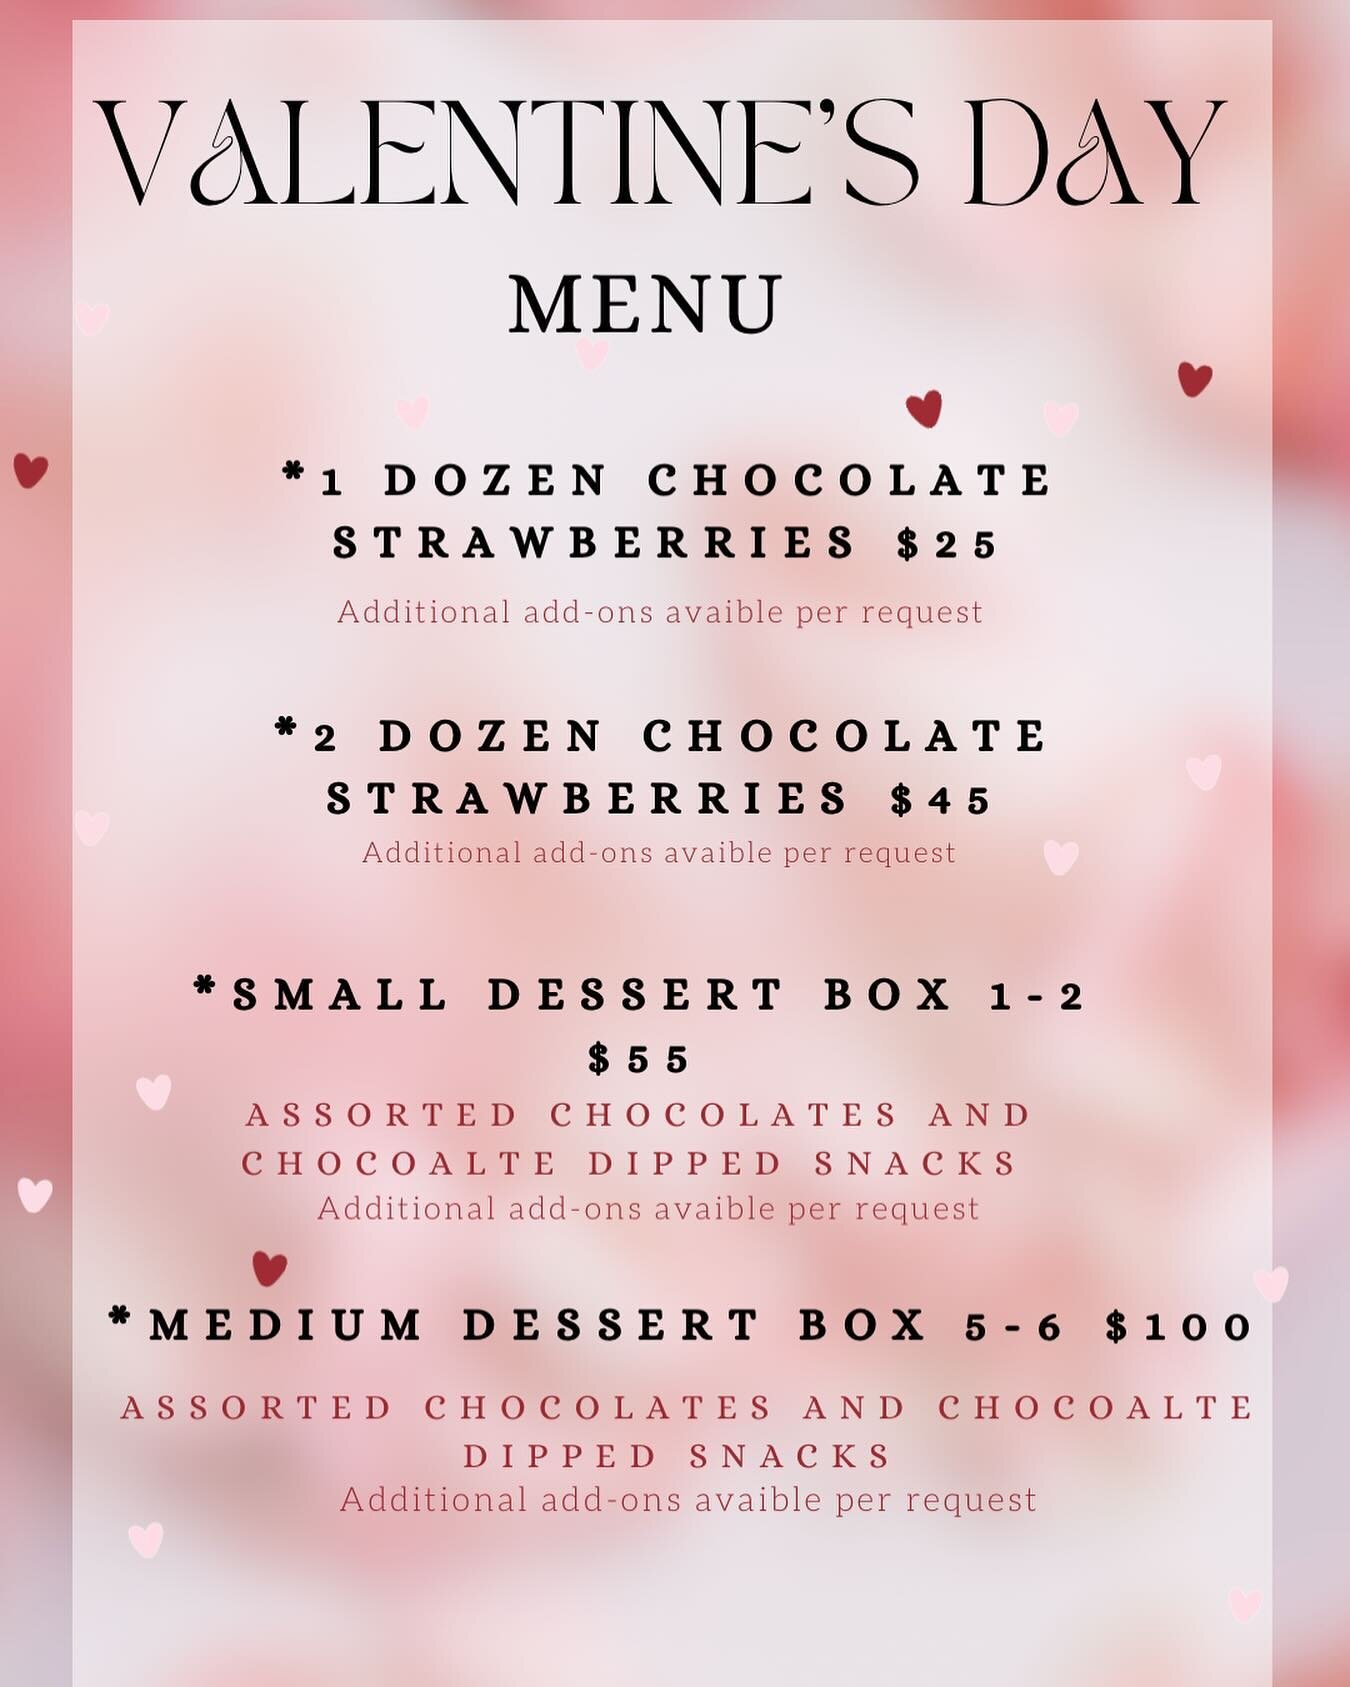 🌸💕VALENTINES DAY 💕🌸

➡️TAKING ORDERS THROUGH FEB 9TH
🚗DELIVERIES AVAILABLE FOR ADDITIONAL COST. 
📅 FEBRUARY 12-14TH AVAILABALE FOR
PICKUP/DELIVERY

✨WWW. TIFFSKITCHEN.COM✨